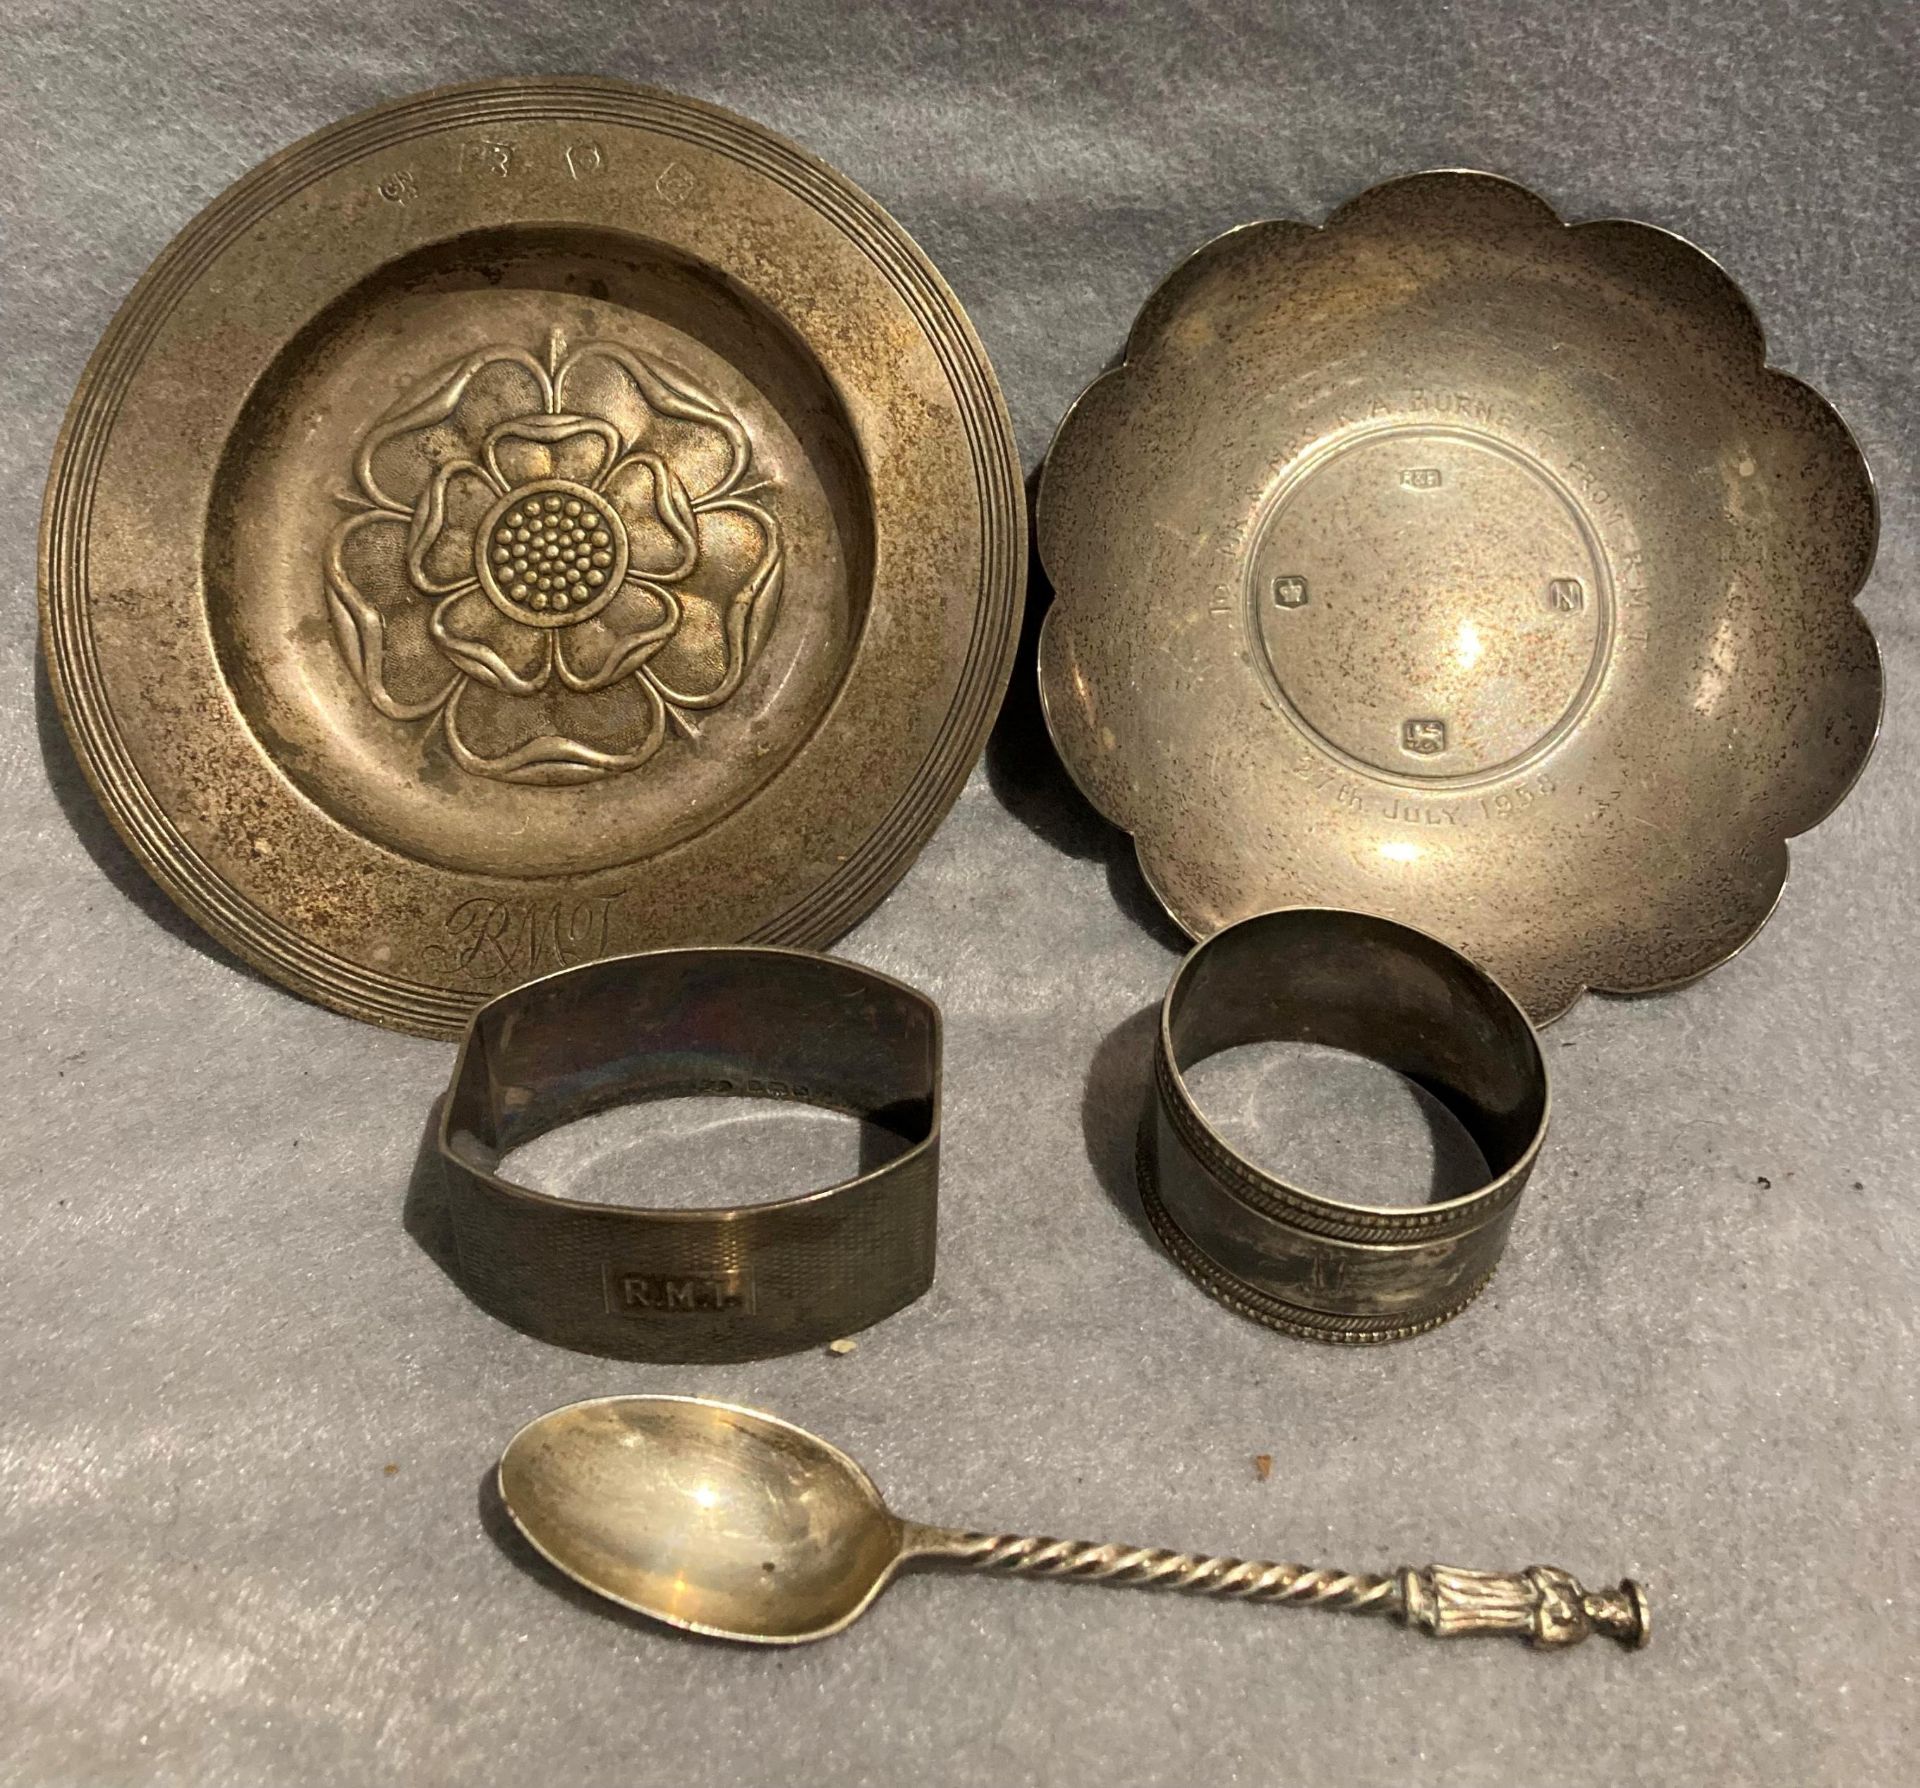 Two small silver dishes, a silver napkin ring, a silver spoon, total approximate weight 7.